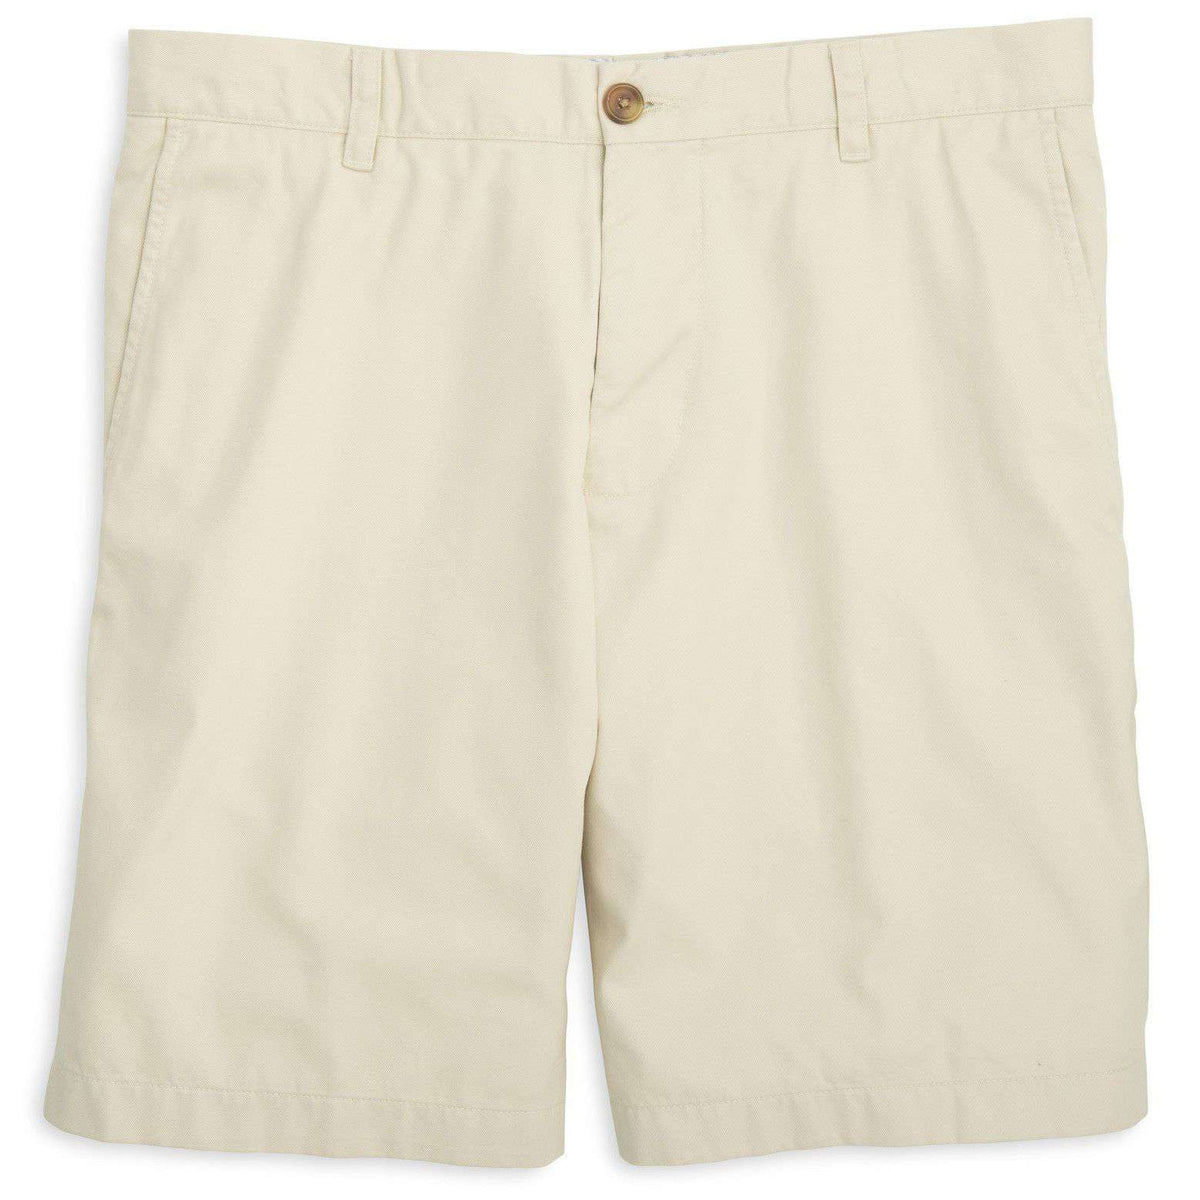 The Skipjack 9" Short in Stone by Southern Tide - Country Club Prep